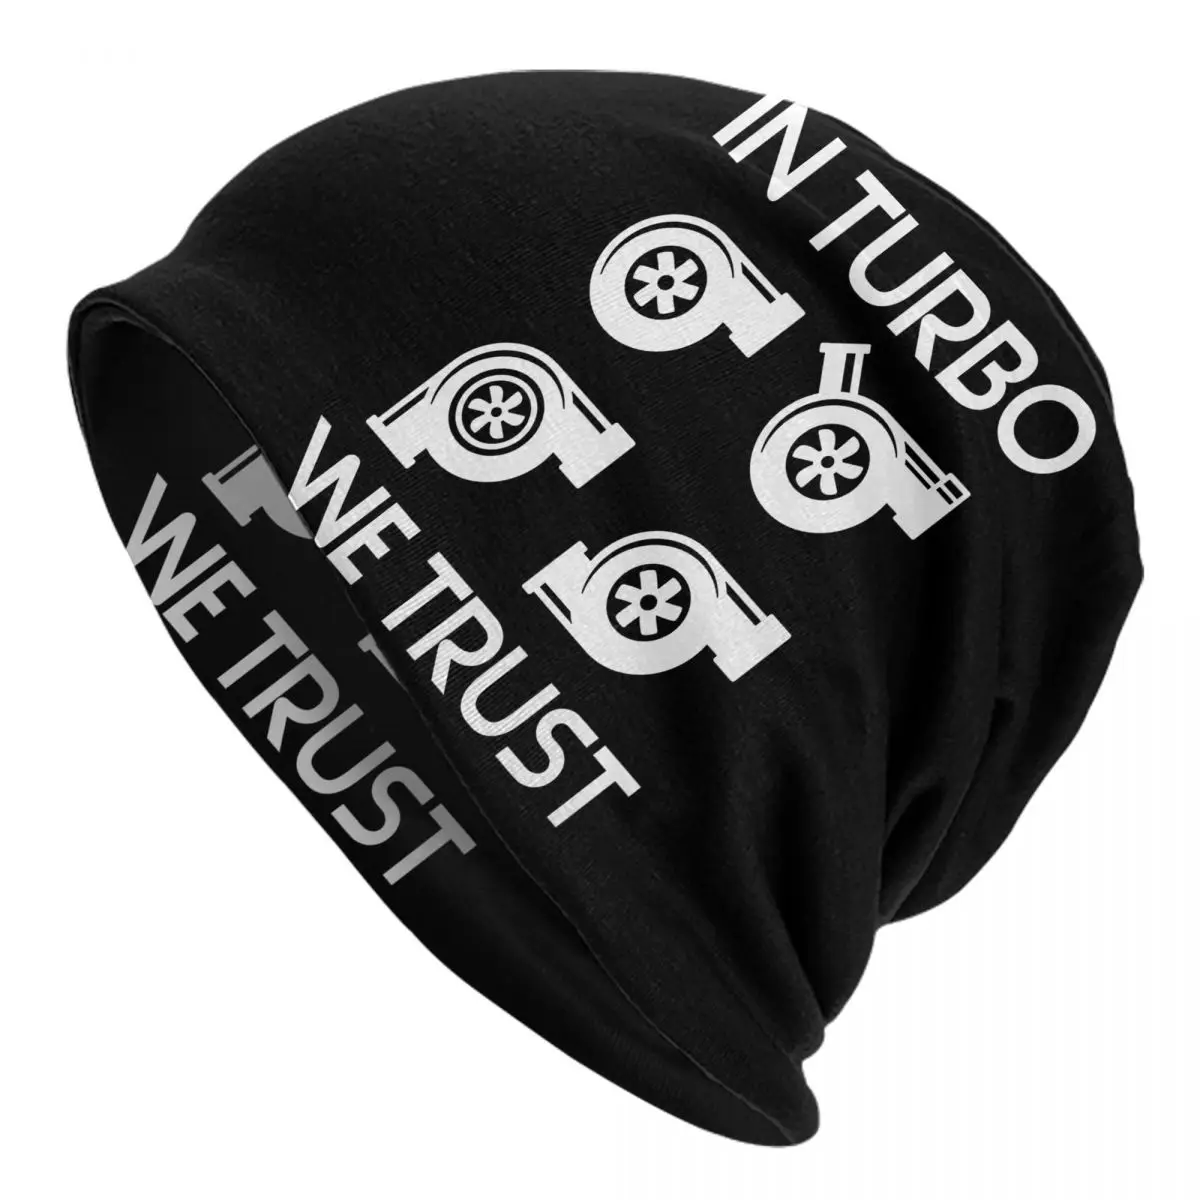 Turbo Car Tuner Boost Adult Men's Women's Knit Hat Keep warm winter knitted hat